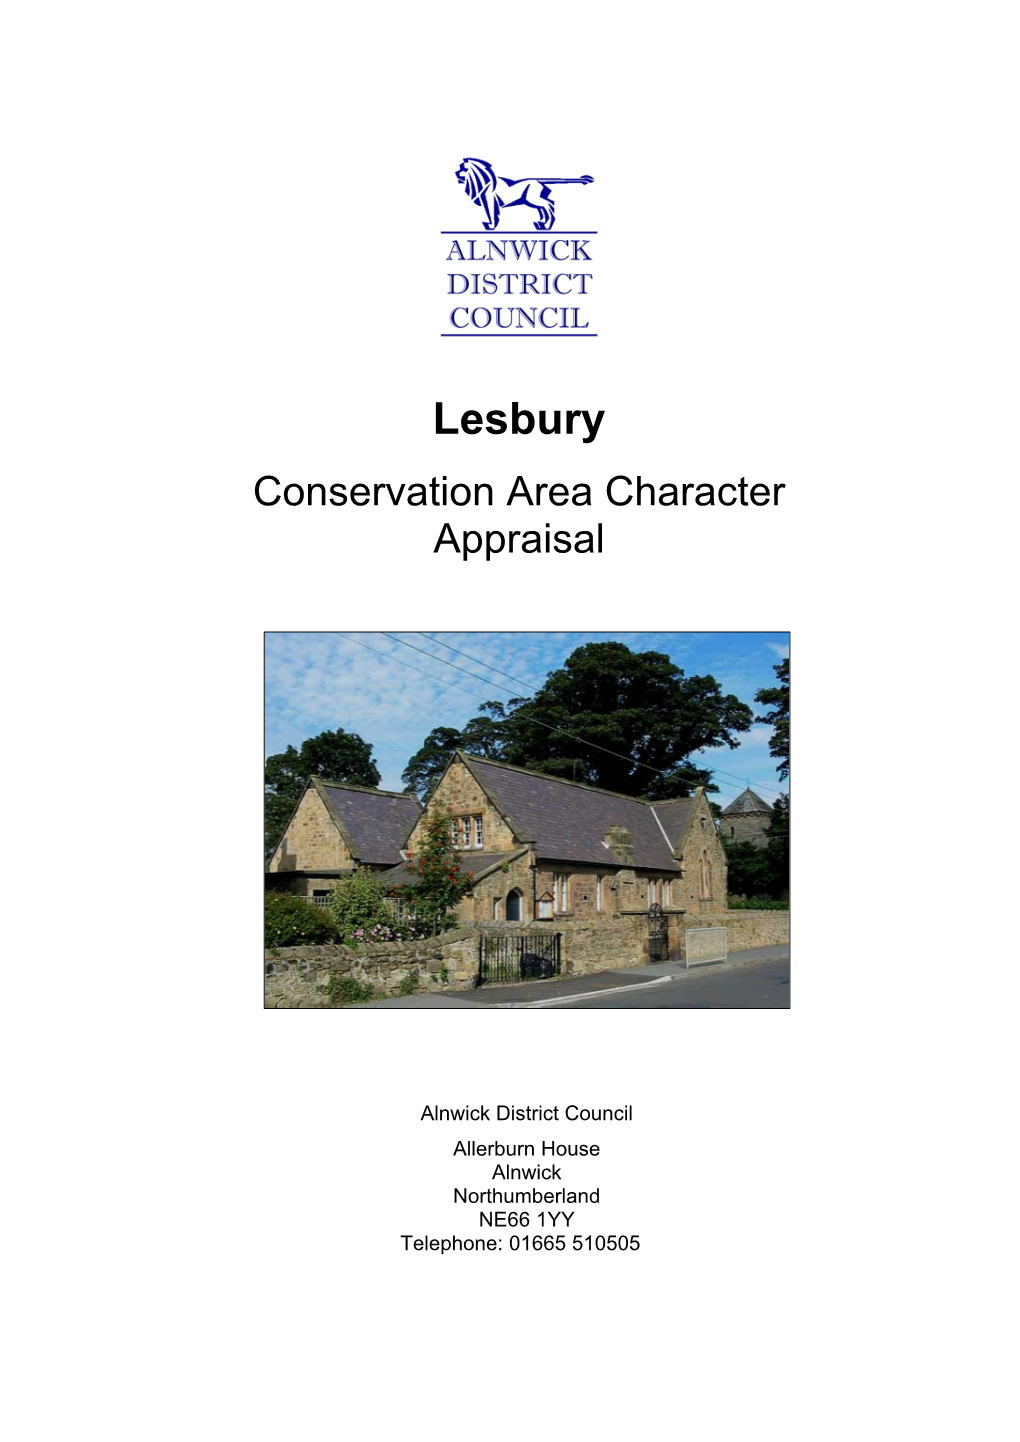 Lesbury Conservation Area Character